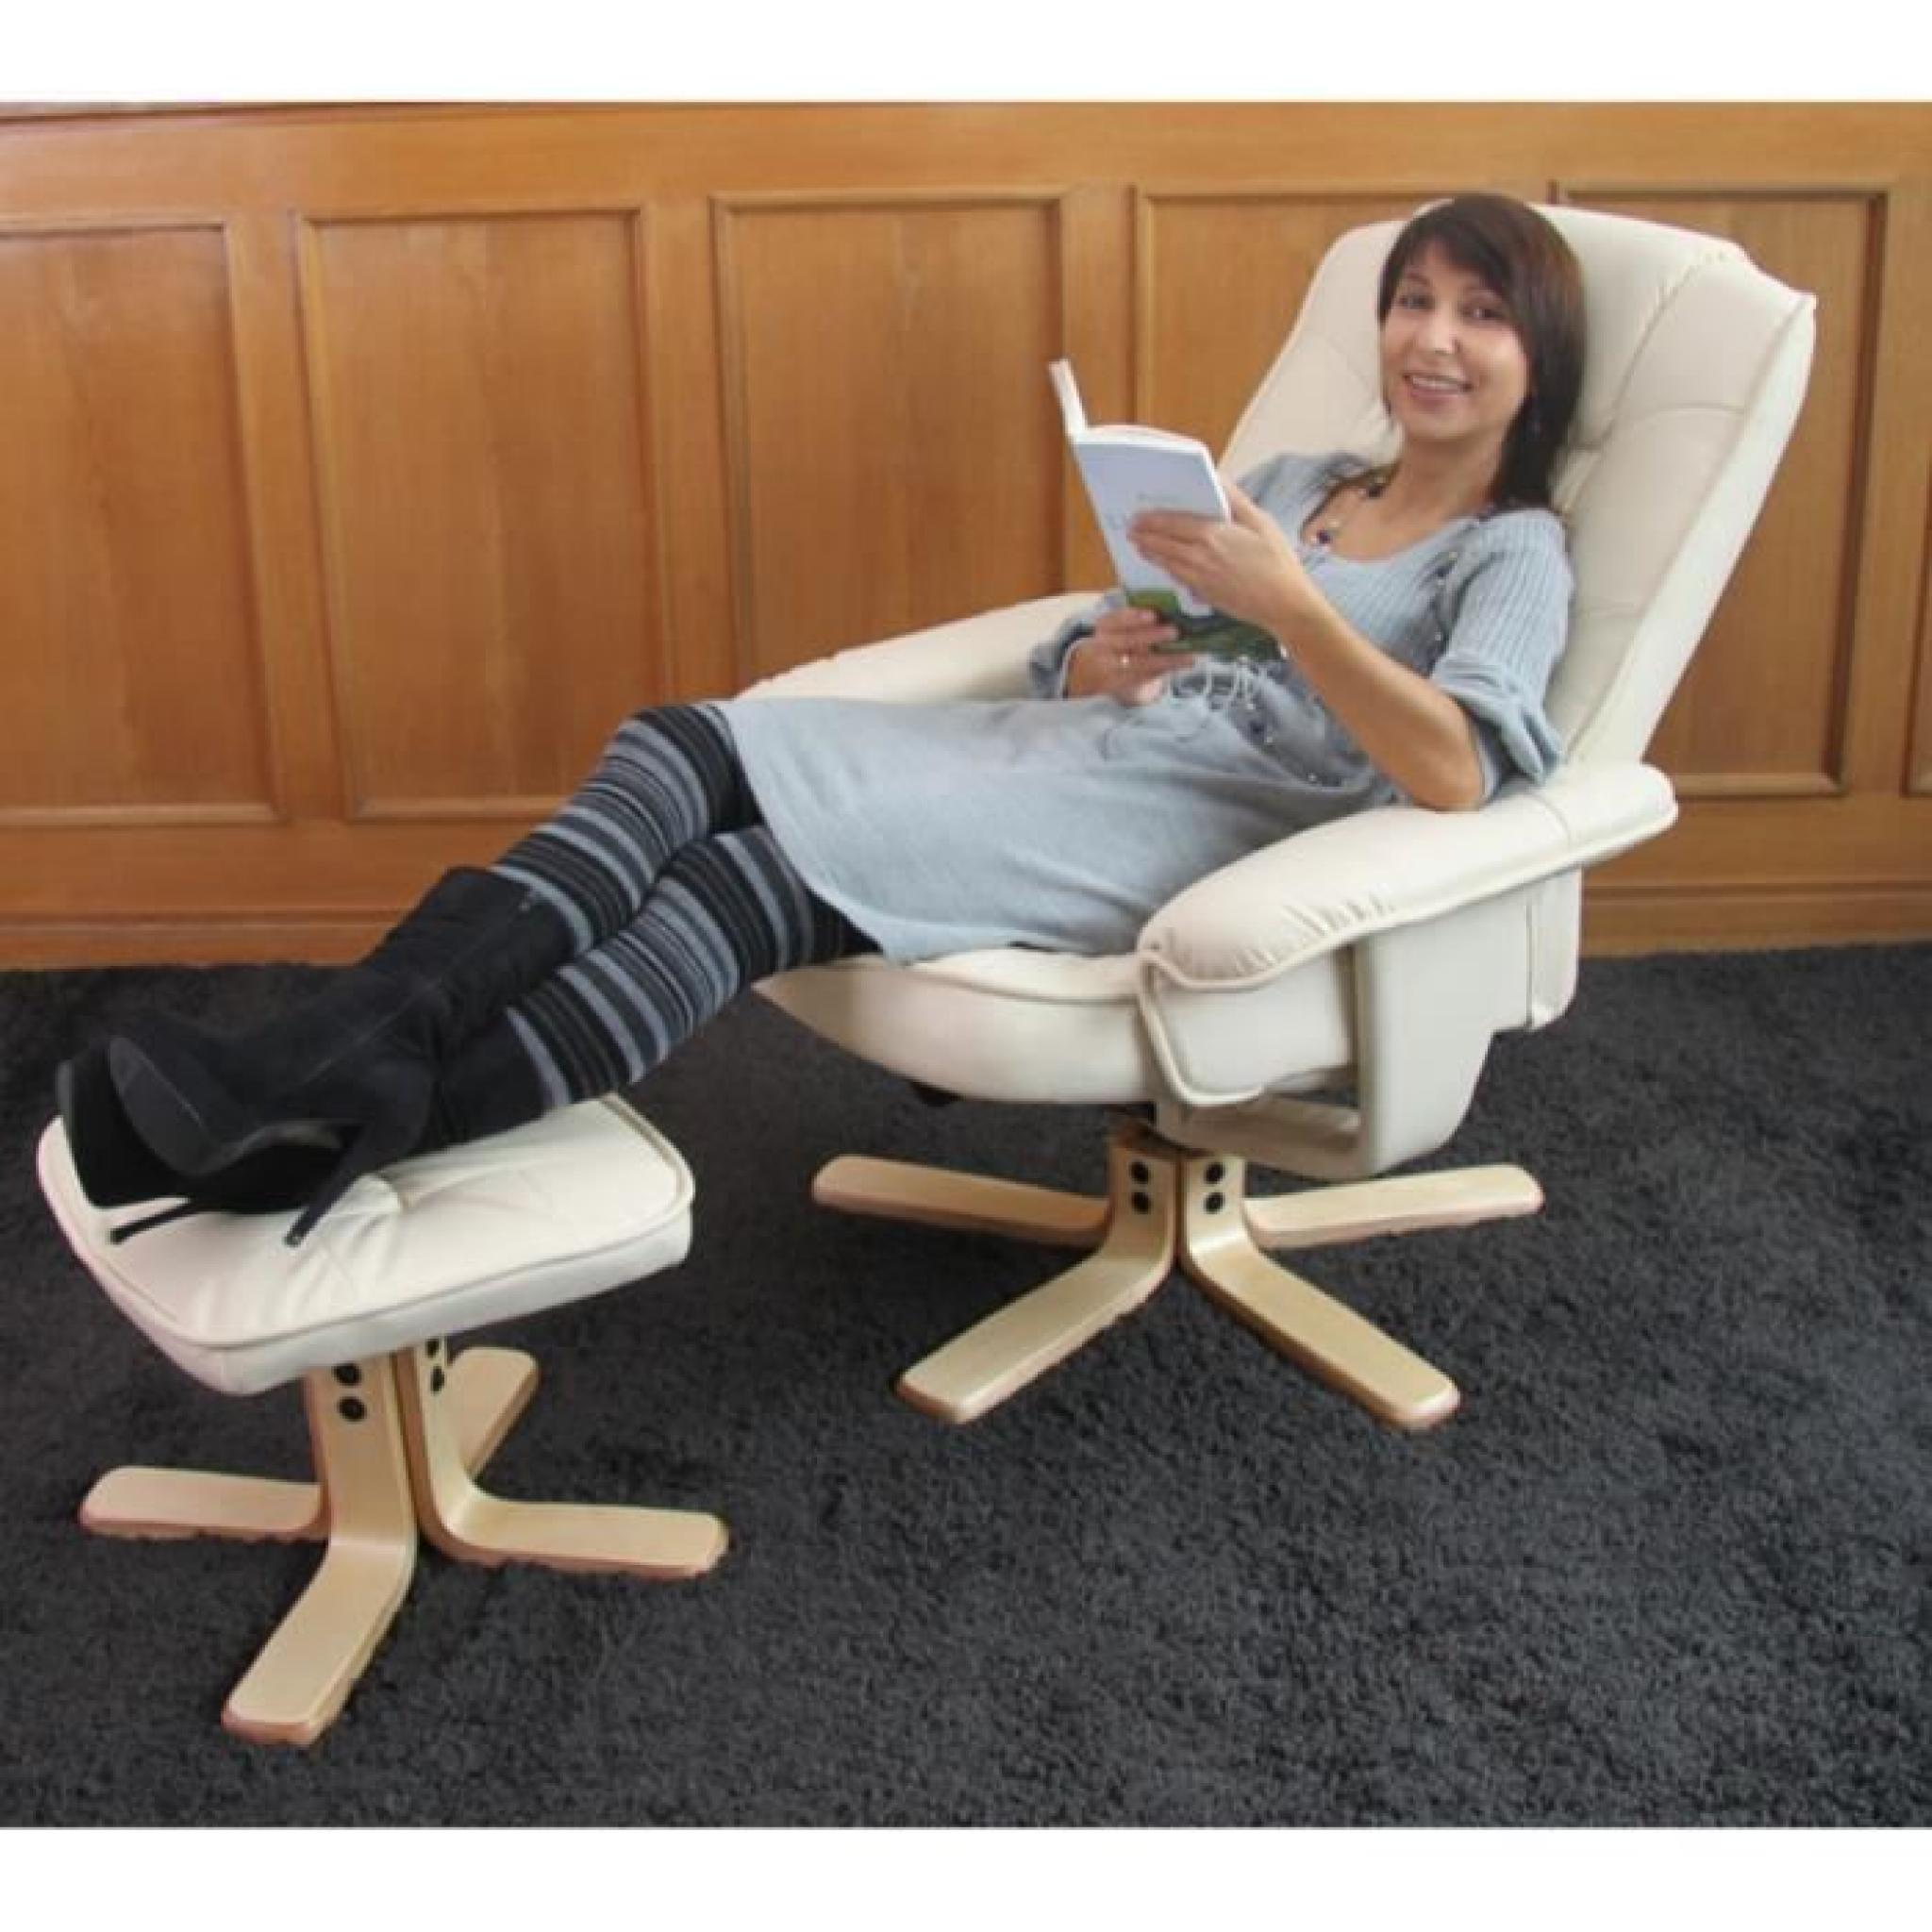 Chaise fauteuil inclinable + repos pied creme pas cher